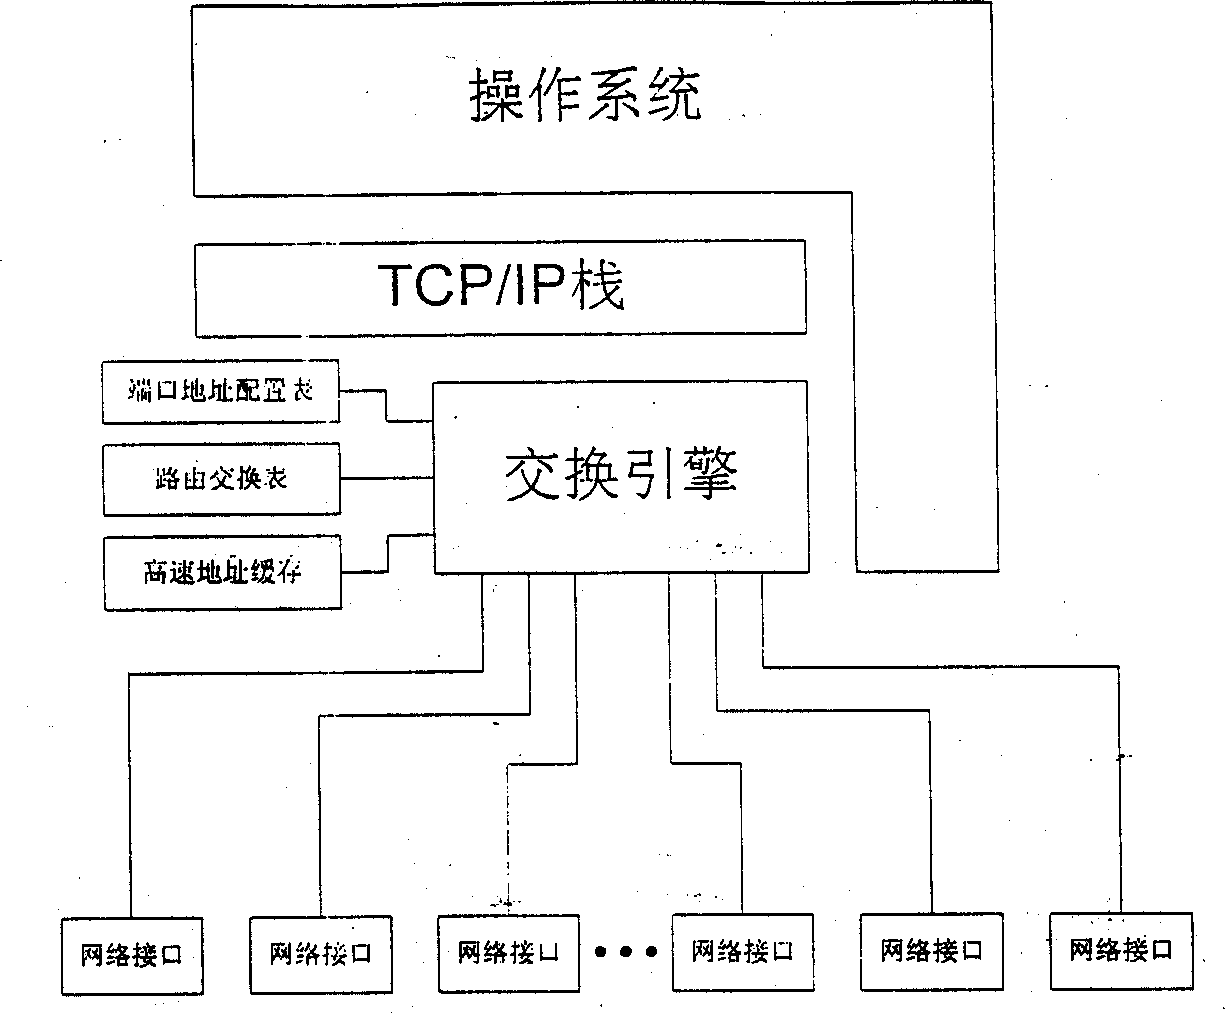 Network capable of transmitting directly IP data package physical medium